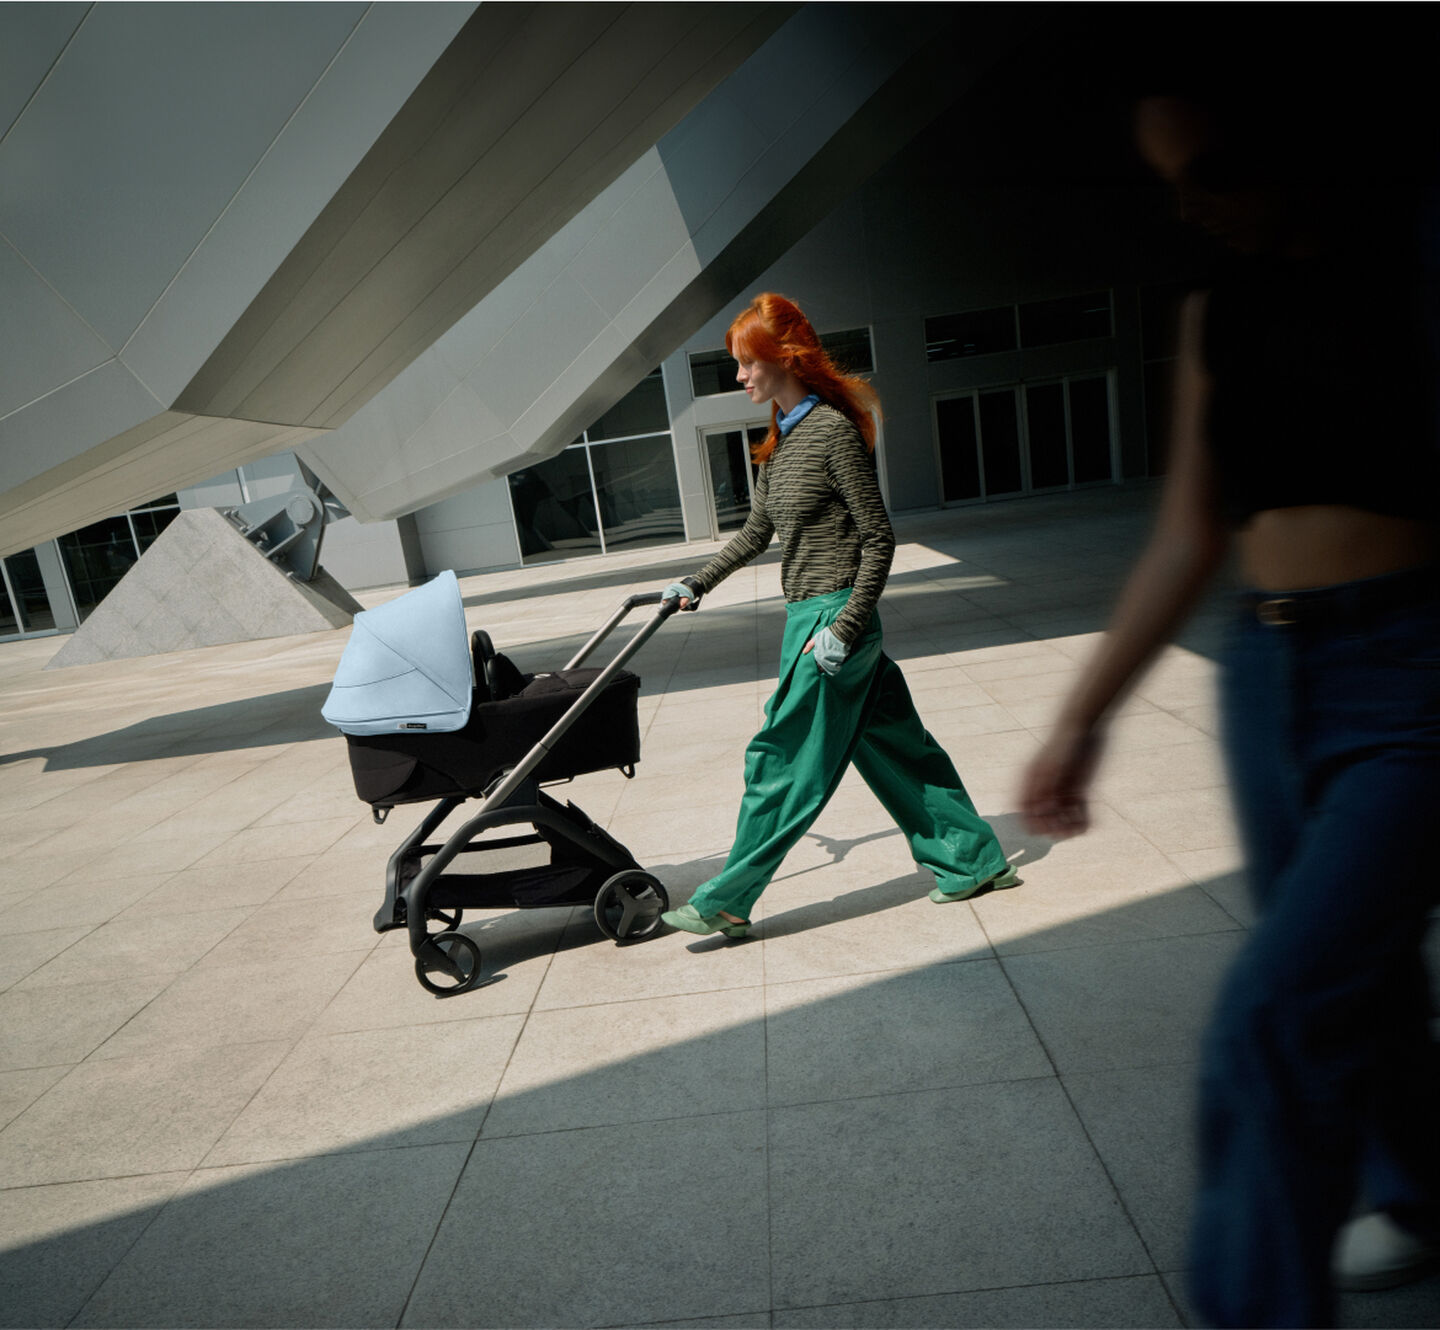 A confident mom walks with her baby in a Bugaboo Dragonfly city stroller as she glides past a futuristic building.